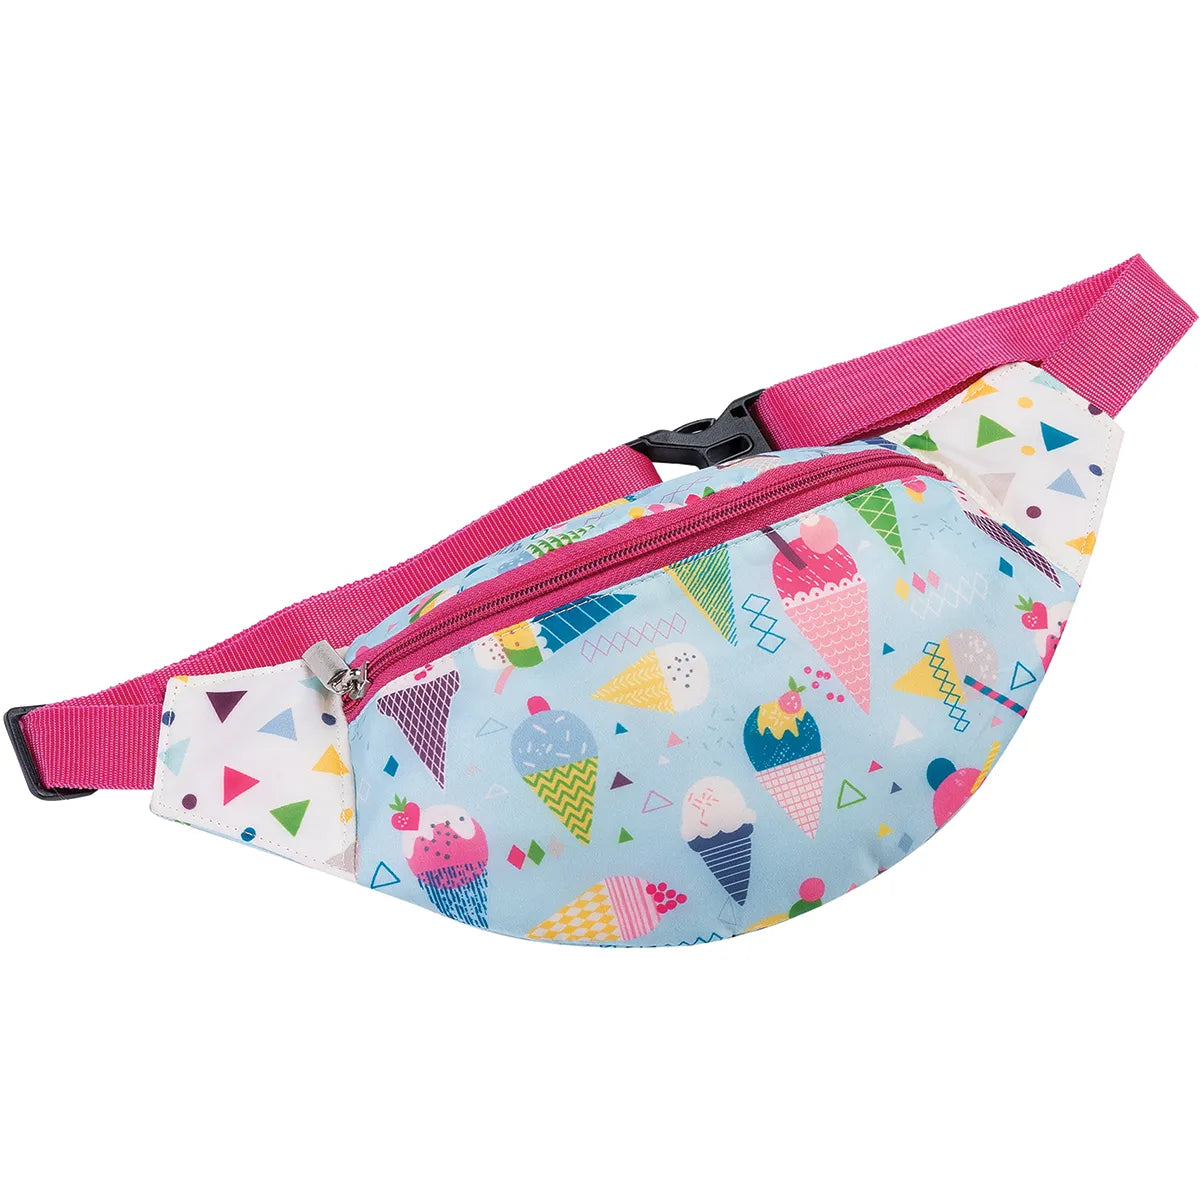 Ice-cream Fanny Pack - Site View